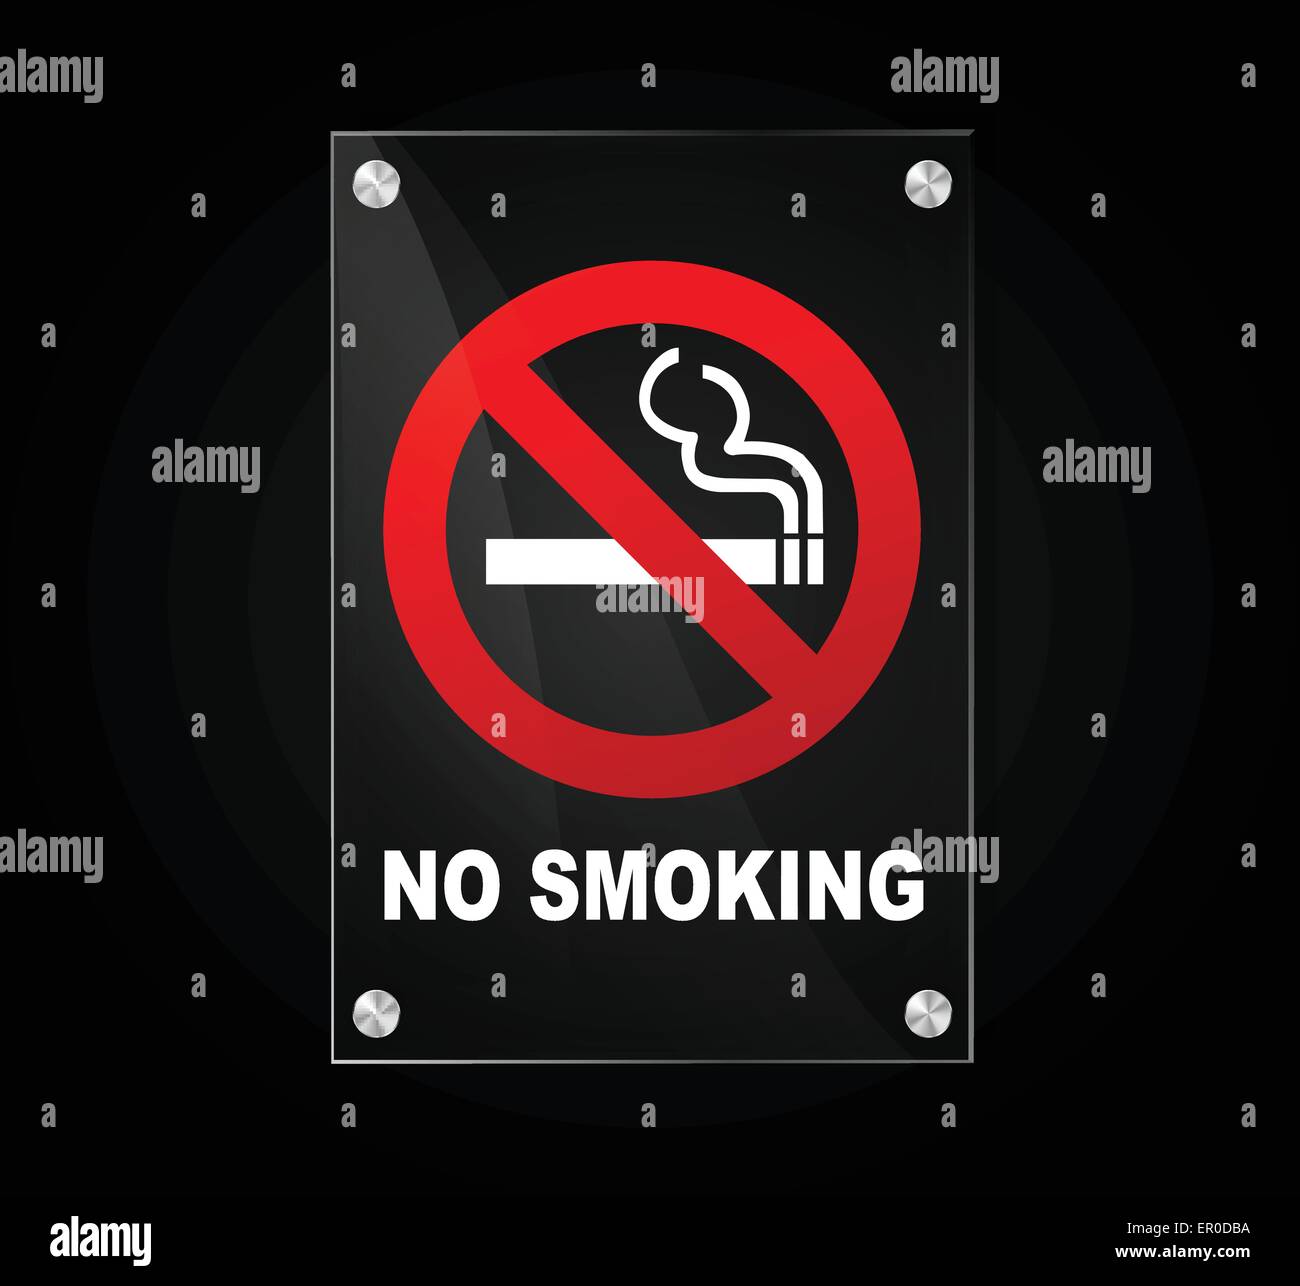 Illustration of no smoking sign on black background Stock Vector